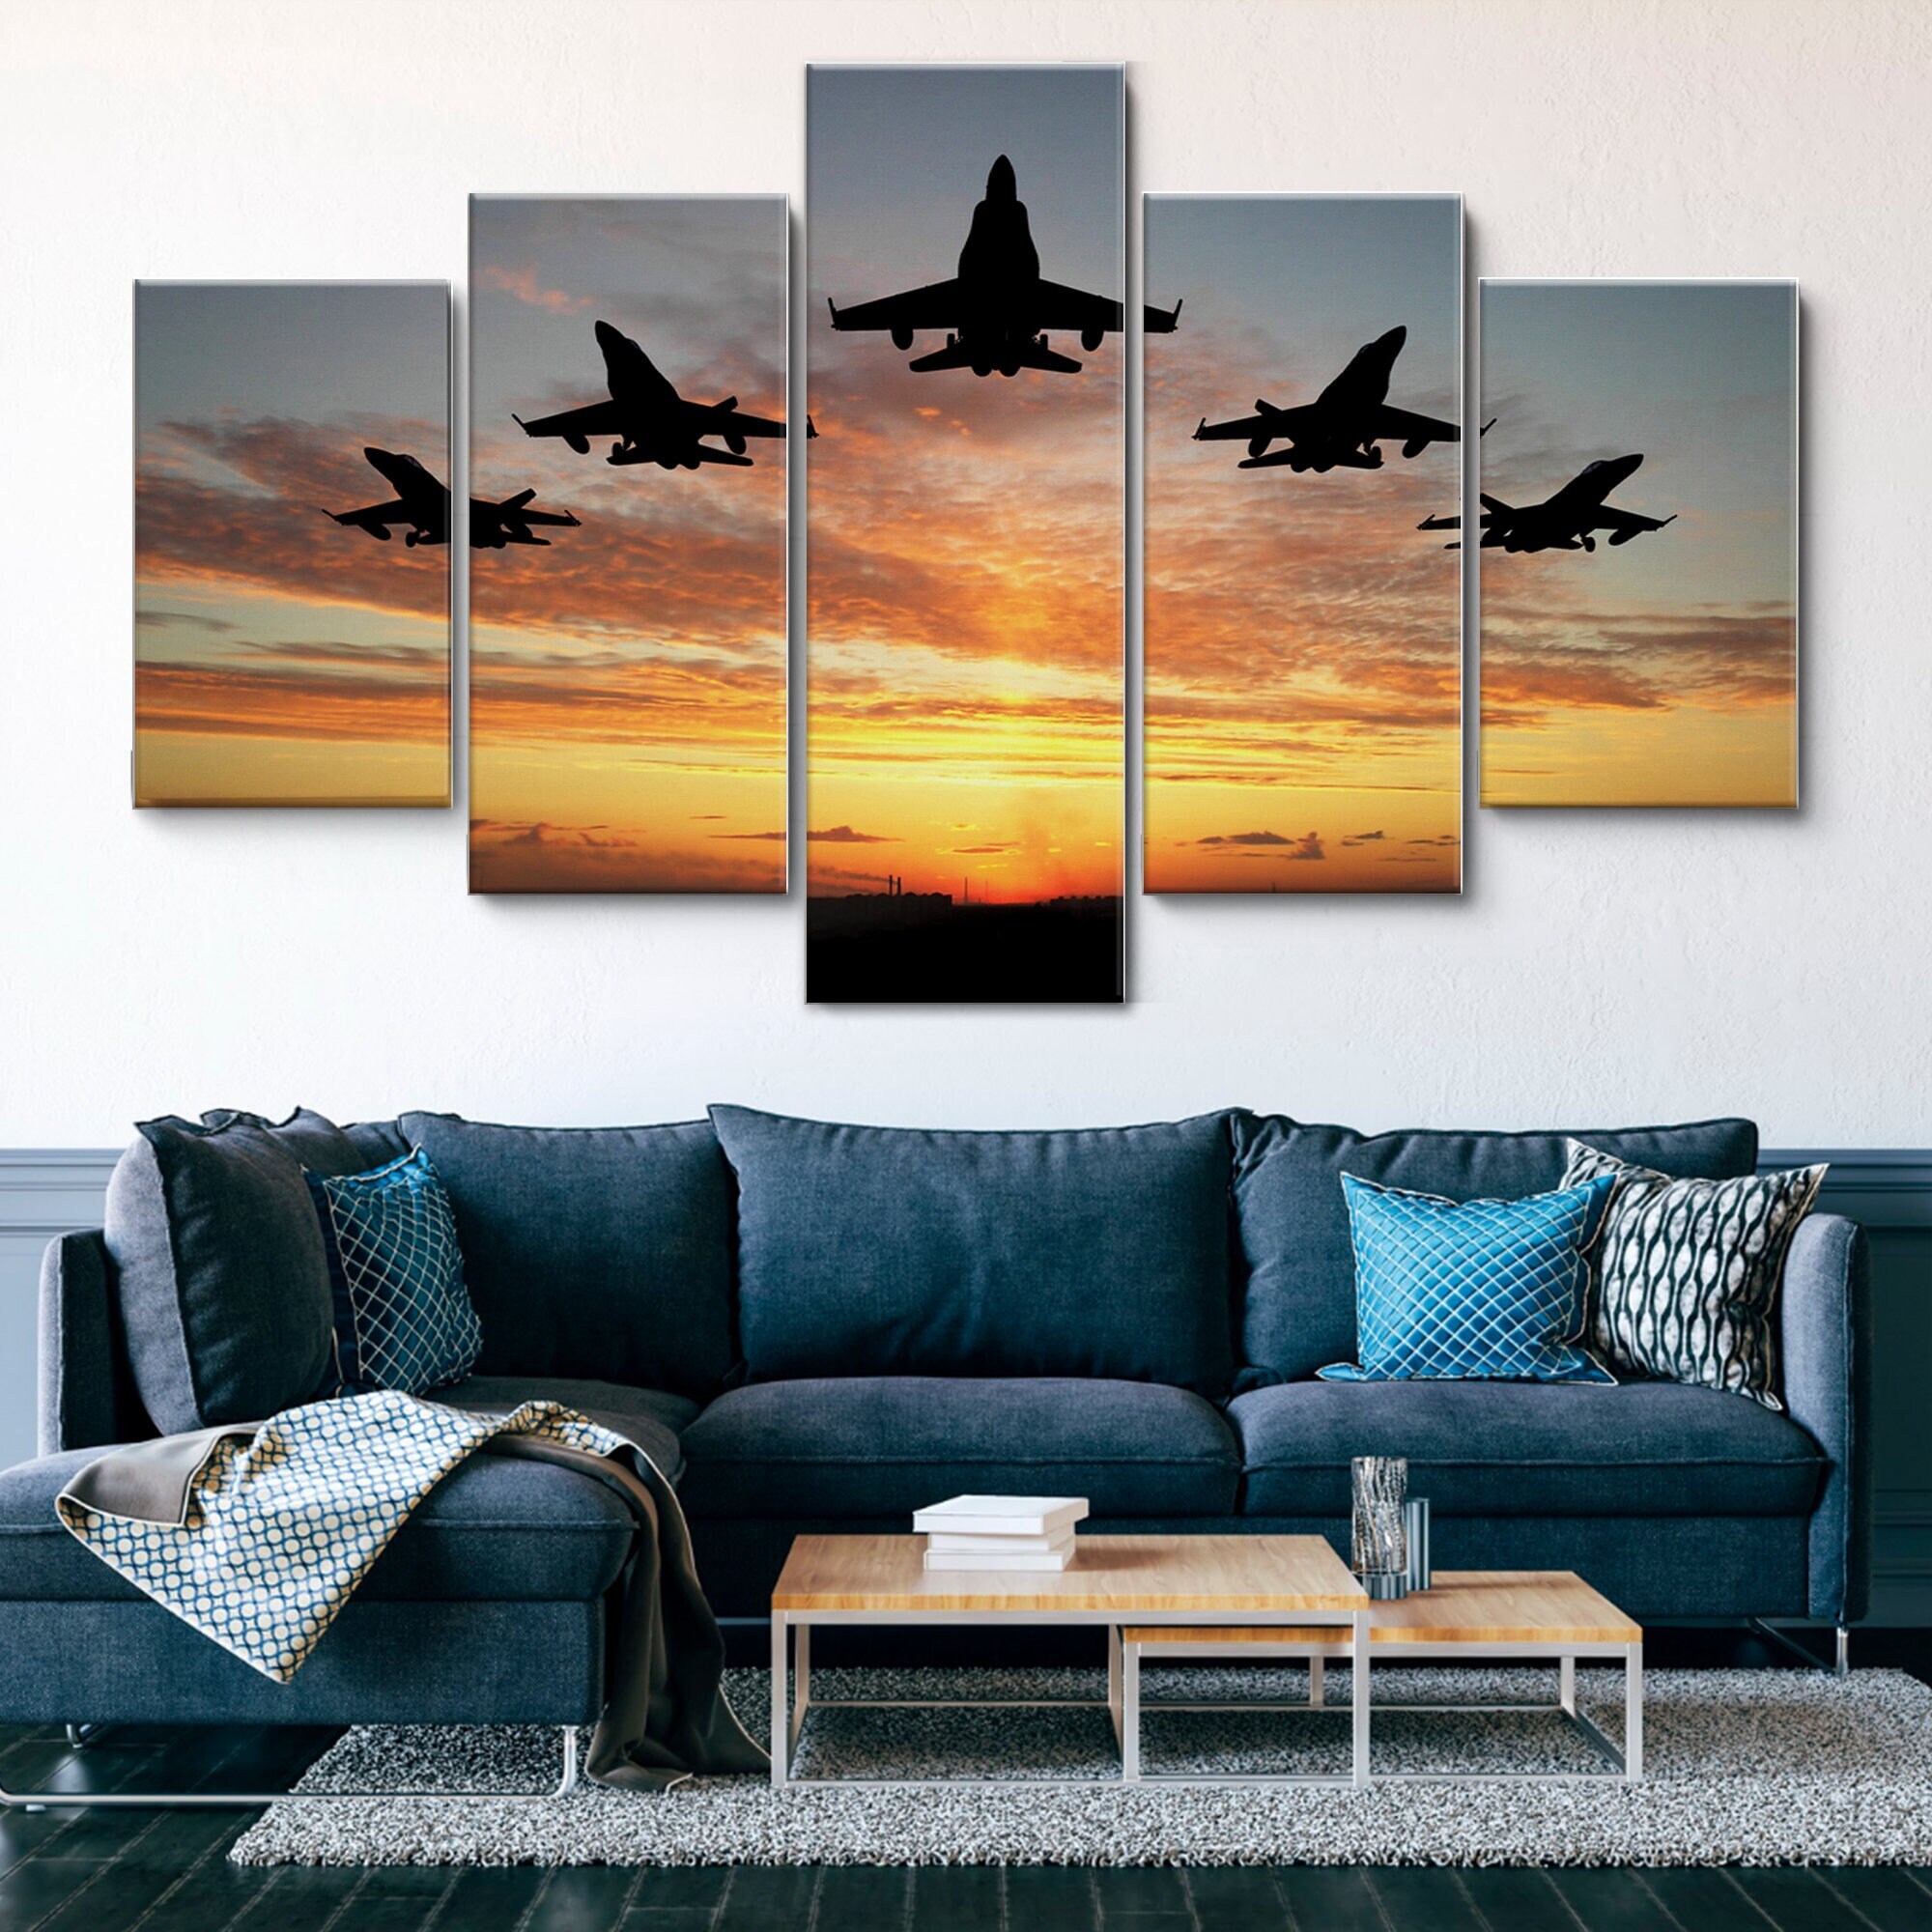 F18 Formation at Sunset 5 Pieces Canvas Wall Art 5 Panels | Etsy